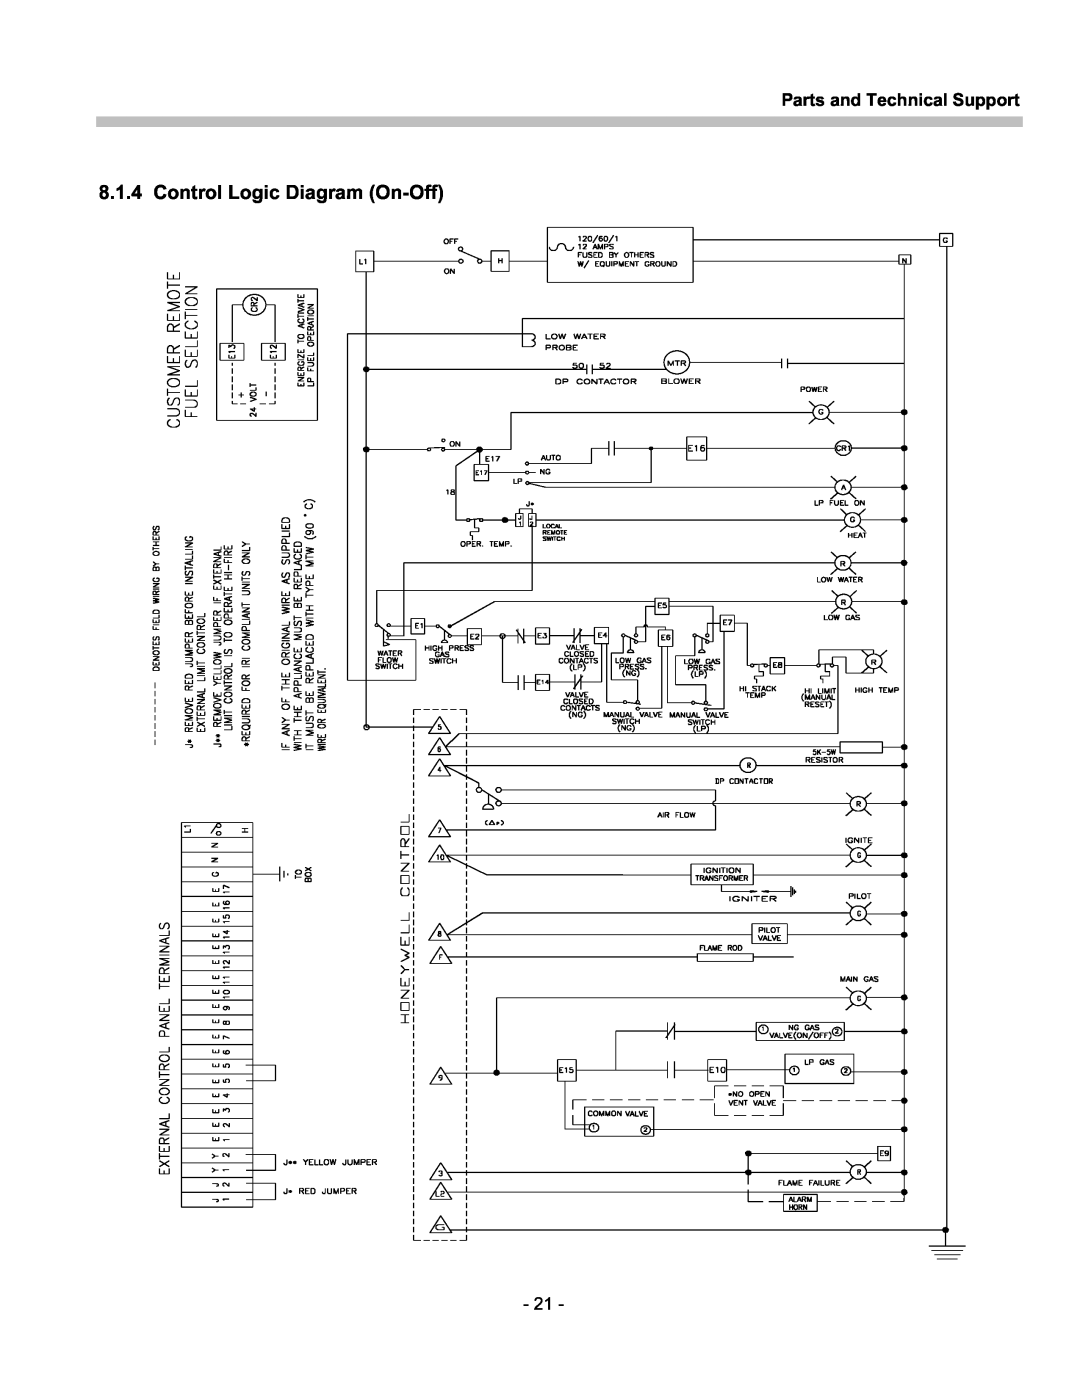 Patterson-Kelley TBIG-03 owner manual Control Logic Diagram On-Off, Parts and Technical Support 